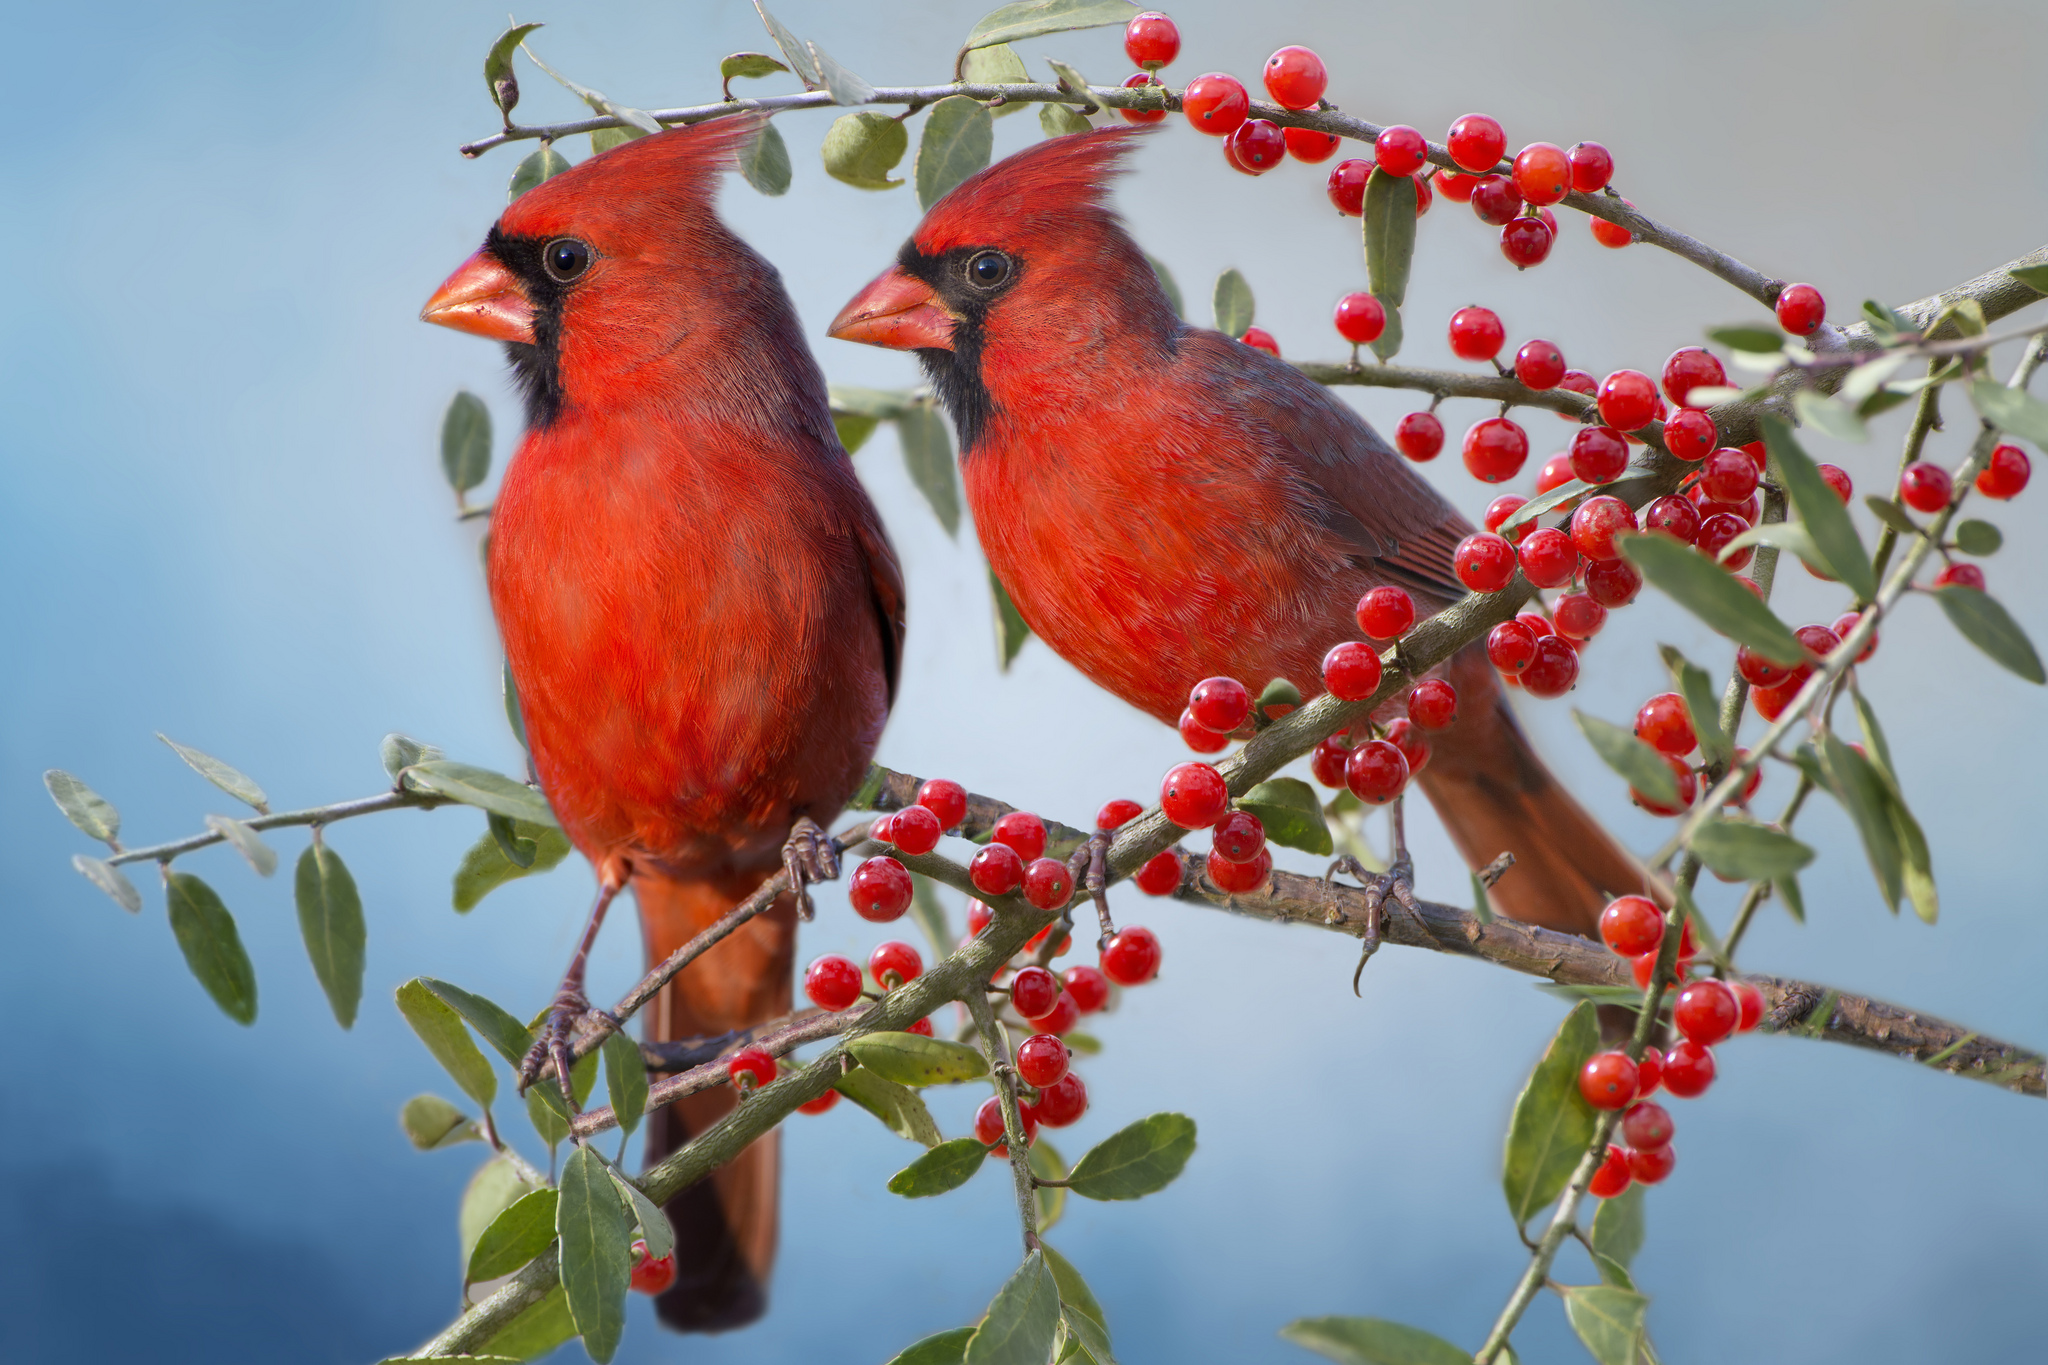 cardinals-on-a-berry-branch-full-hd-wallpaper-and-background-image